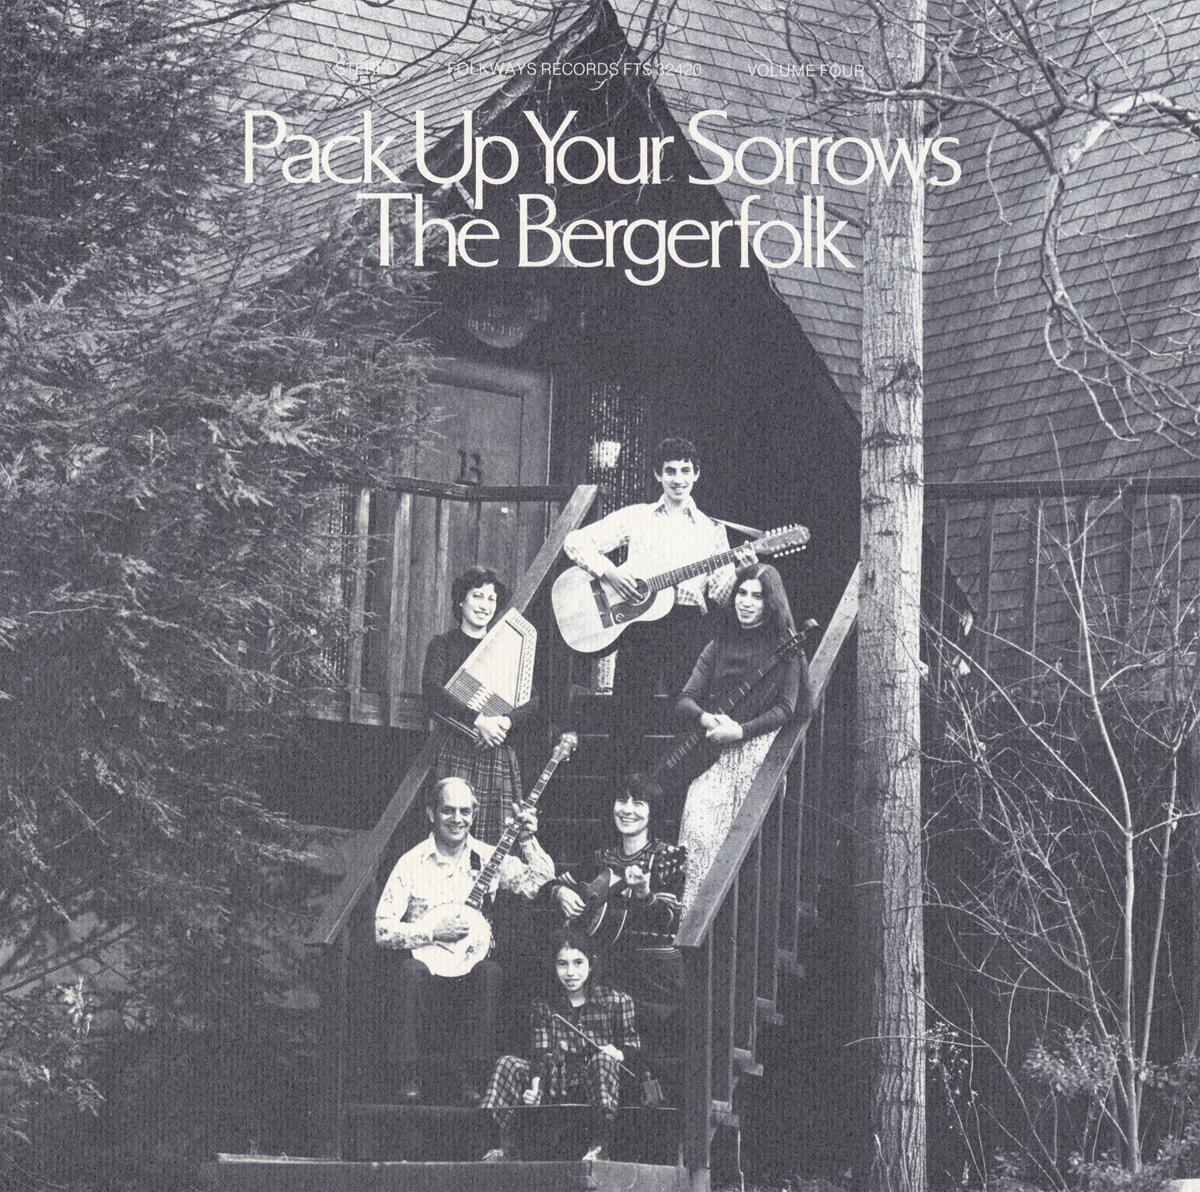 BERGERFOLK, VOL. 4: PACK UP YOUR SORROWS